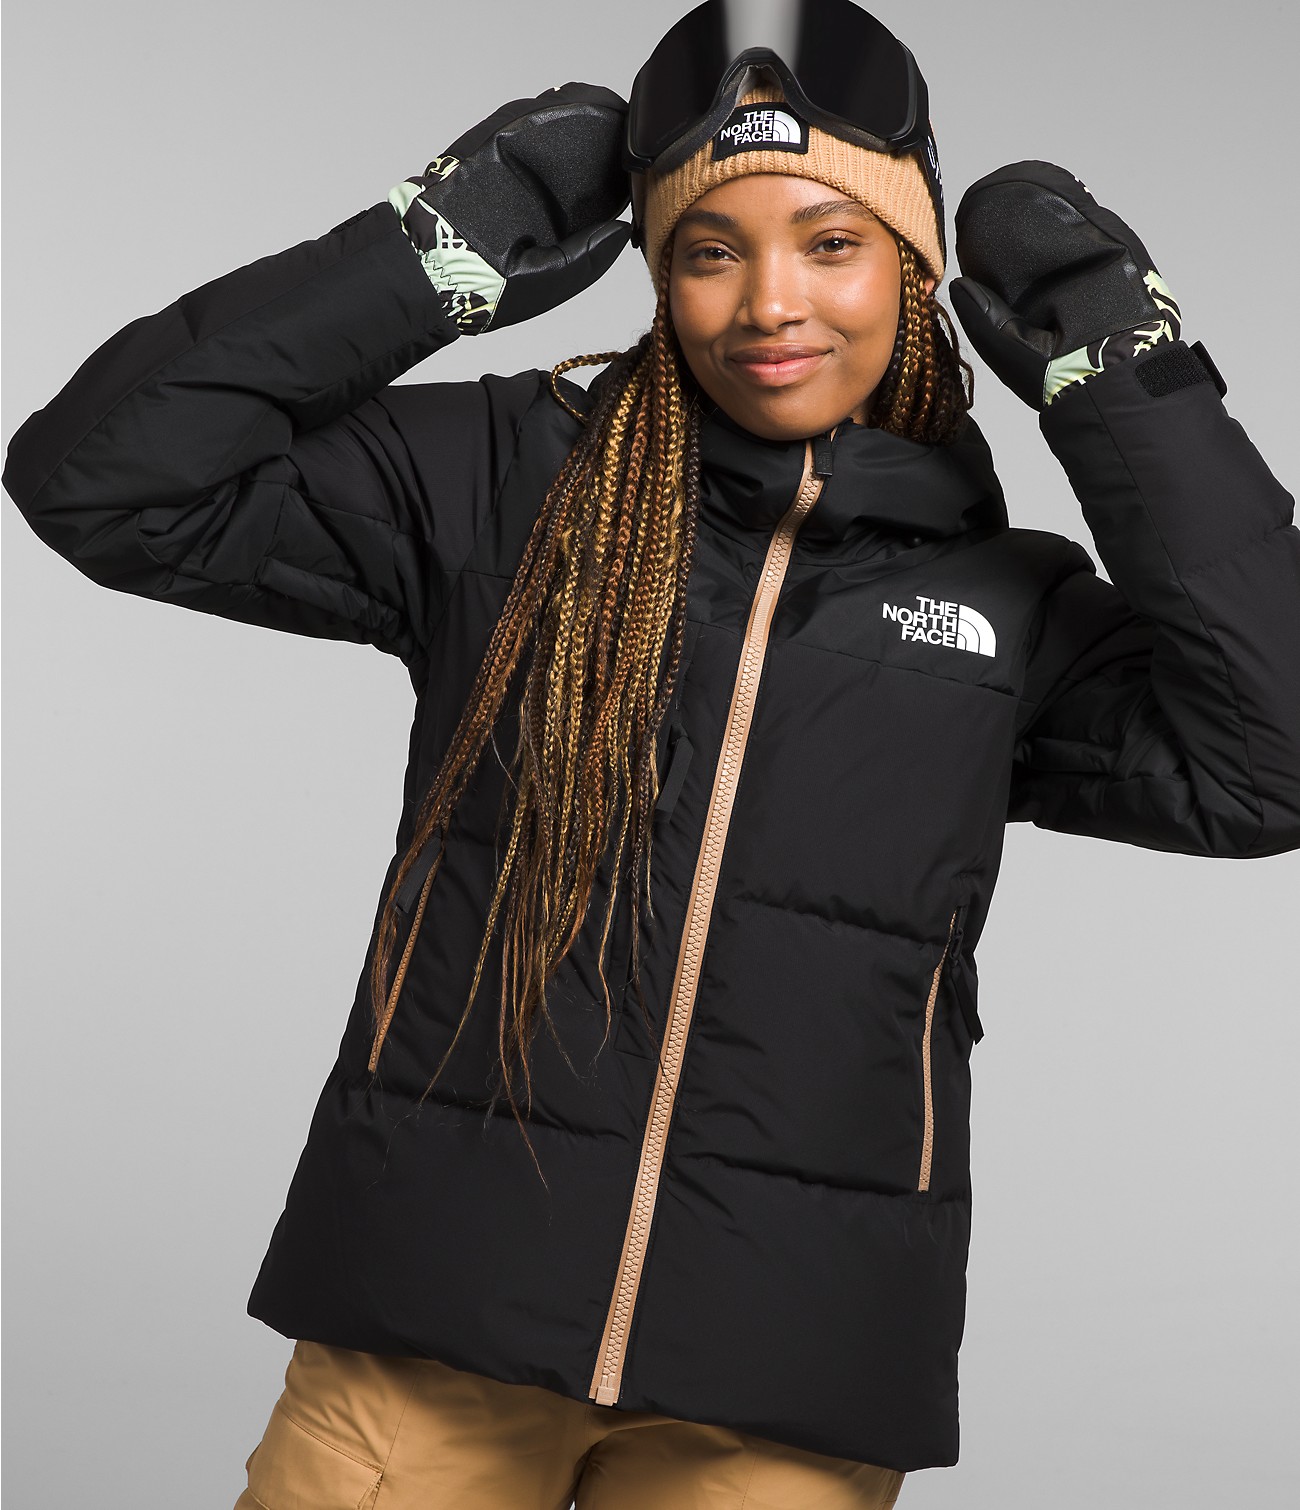 Unlock Wilderness' choice in the Obermeyer Vs North Face comparison, the Corefire Down Windstopper® Jacket by The North Face